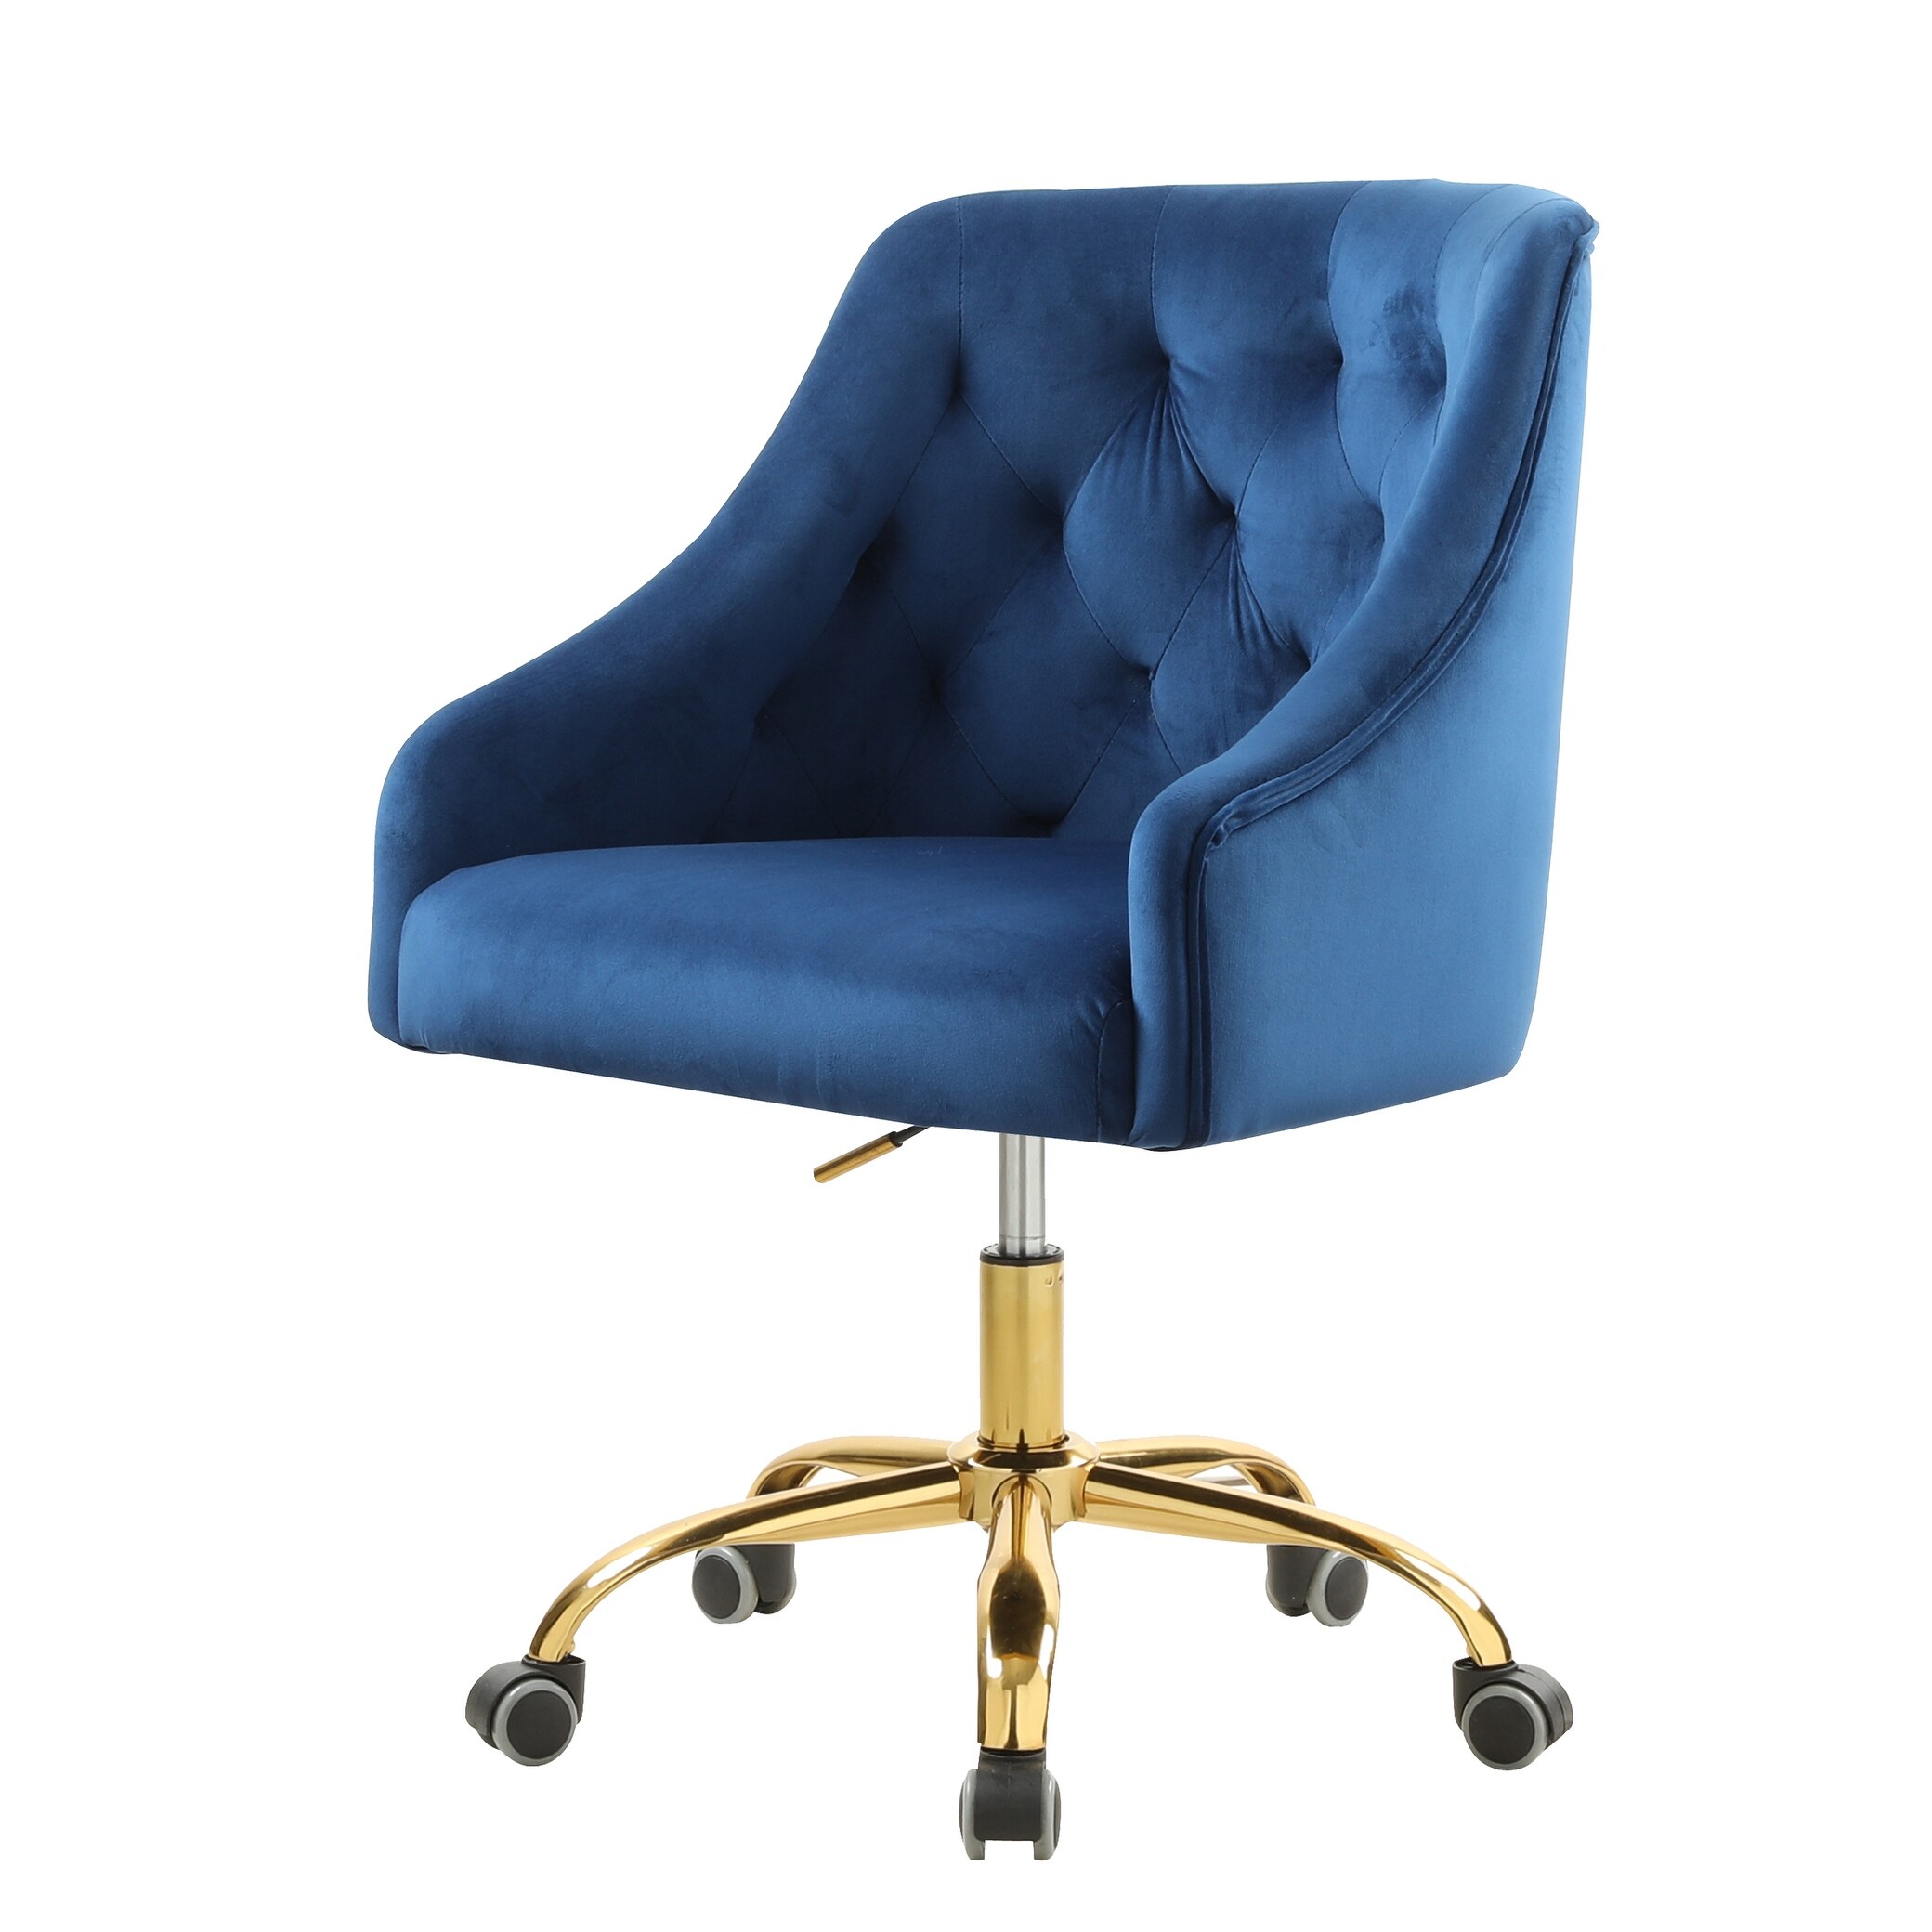 https://ak1.ostkcdn.com/images/products/is/images/direct/f75b1eb578678d9a4b7cac0549d68c93e633d561/Velvet-Swivel-Upholstered-adjustable-height-Home-office-Chair-With-Golden-Legs.jpg